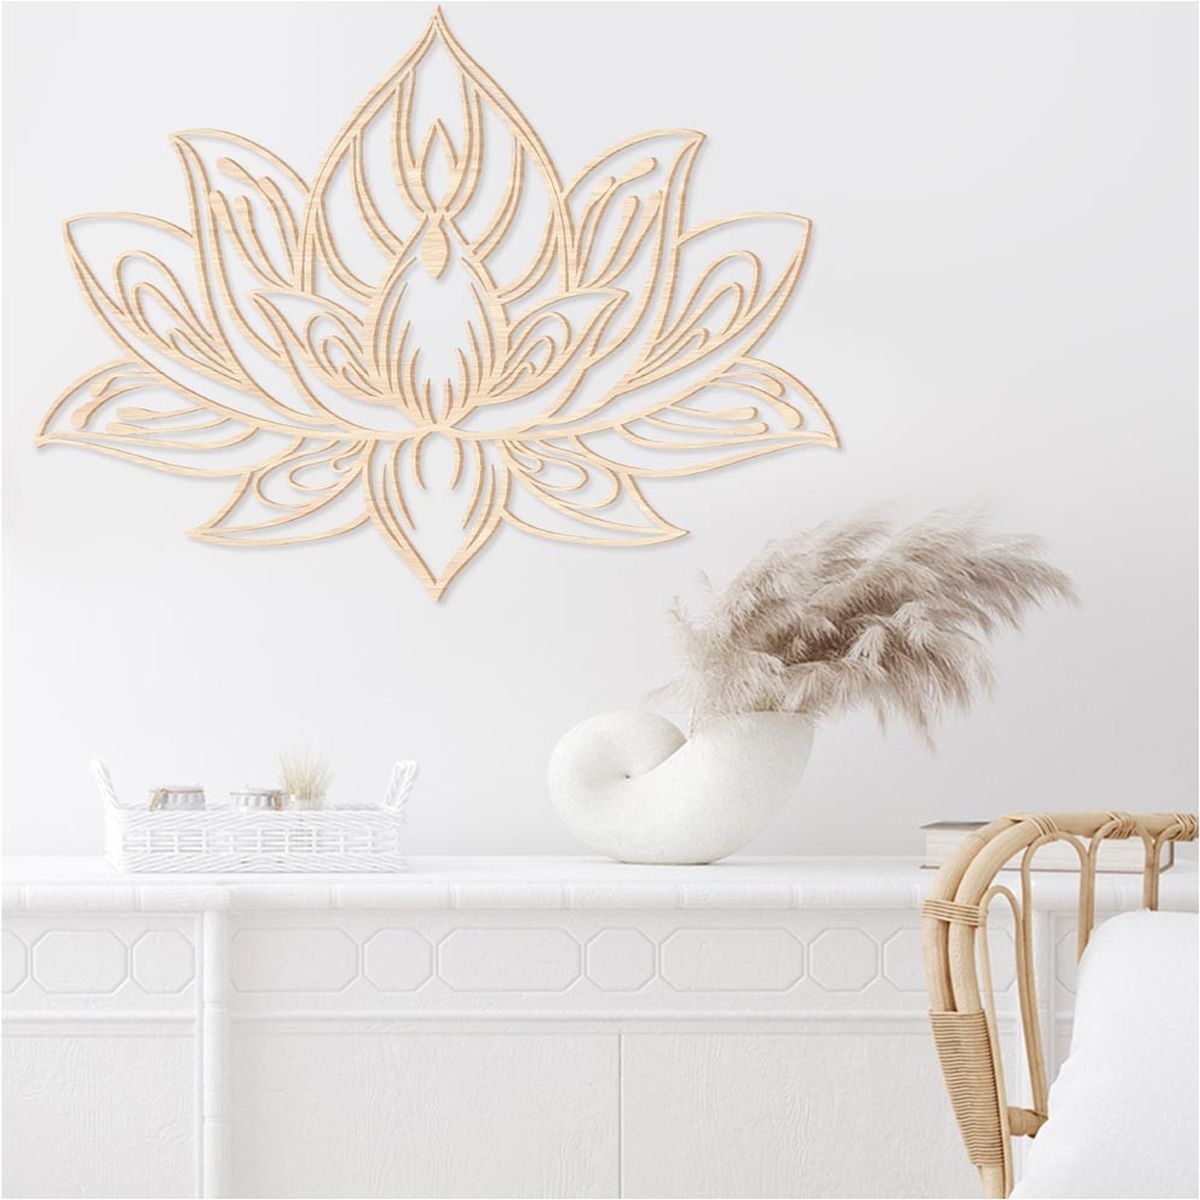 Lotus wooden wall decoration